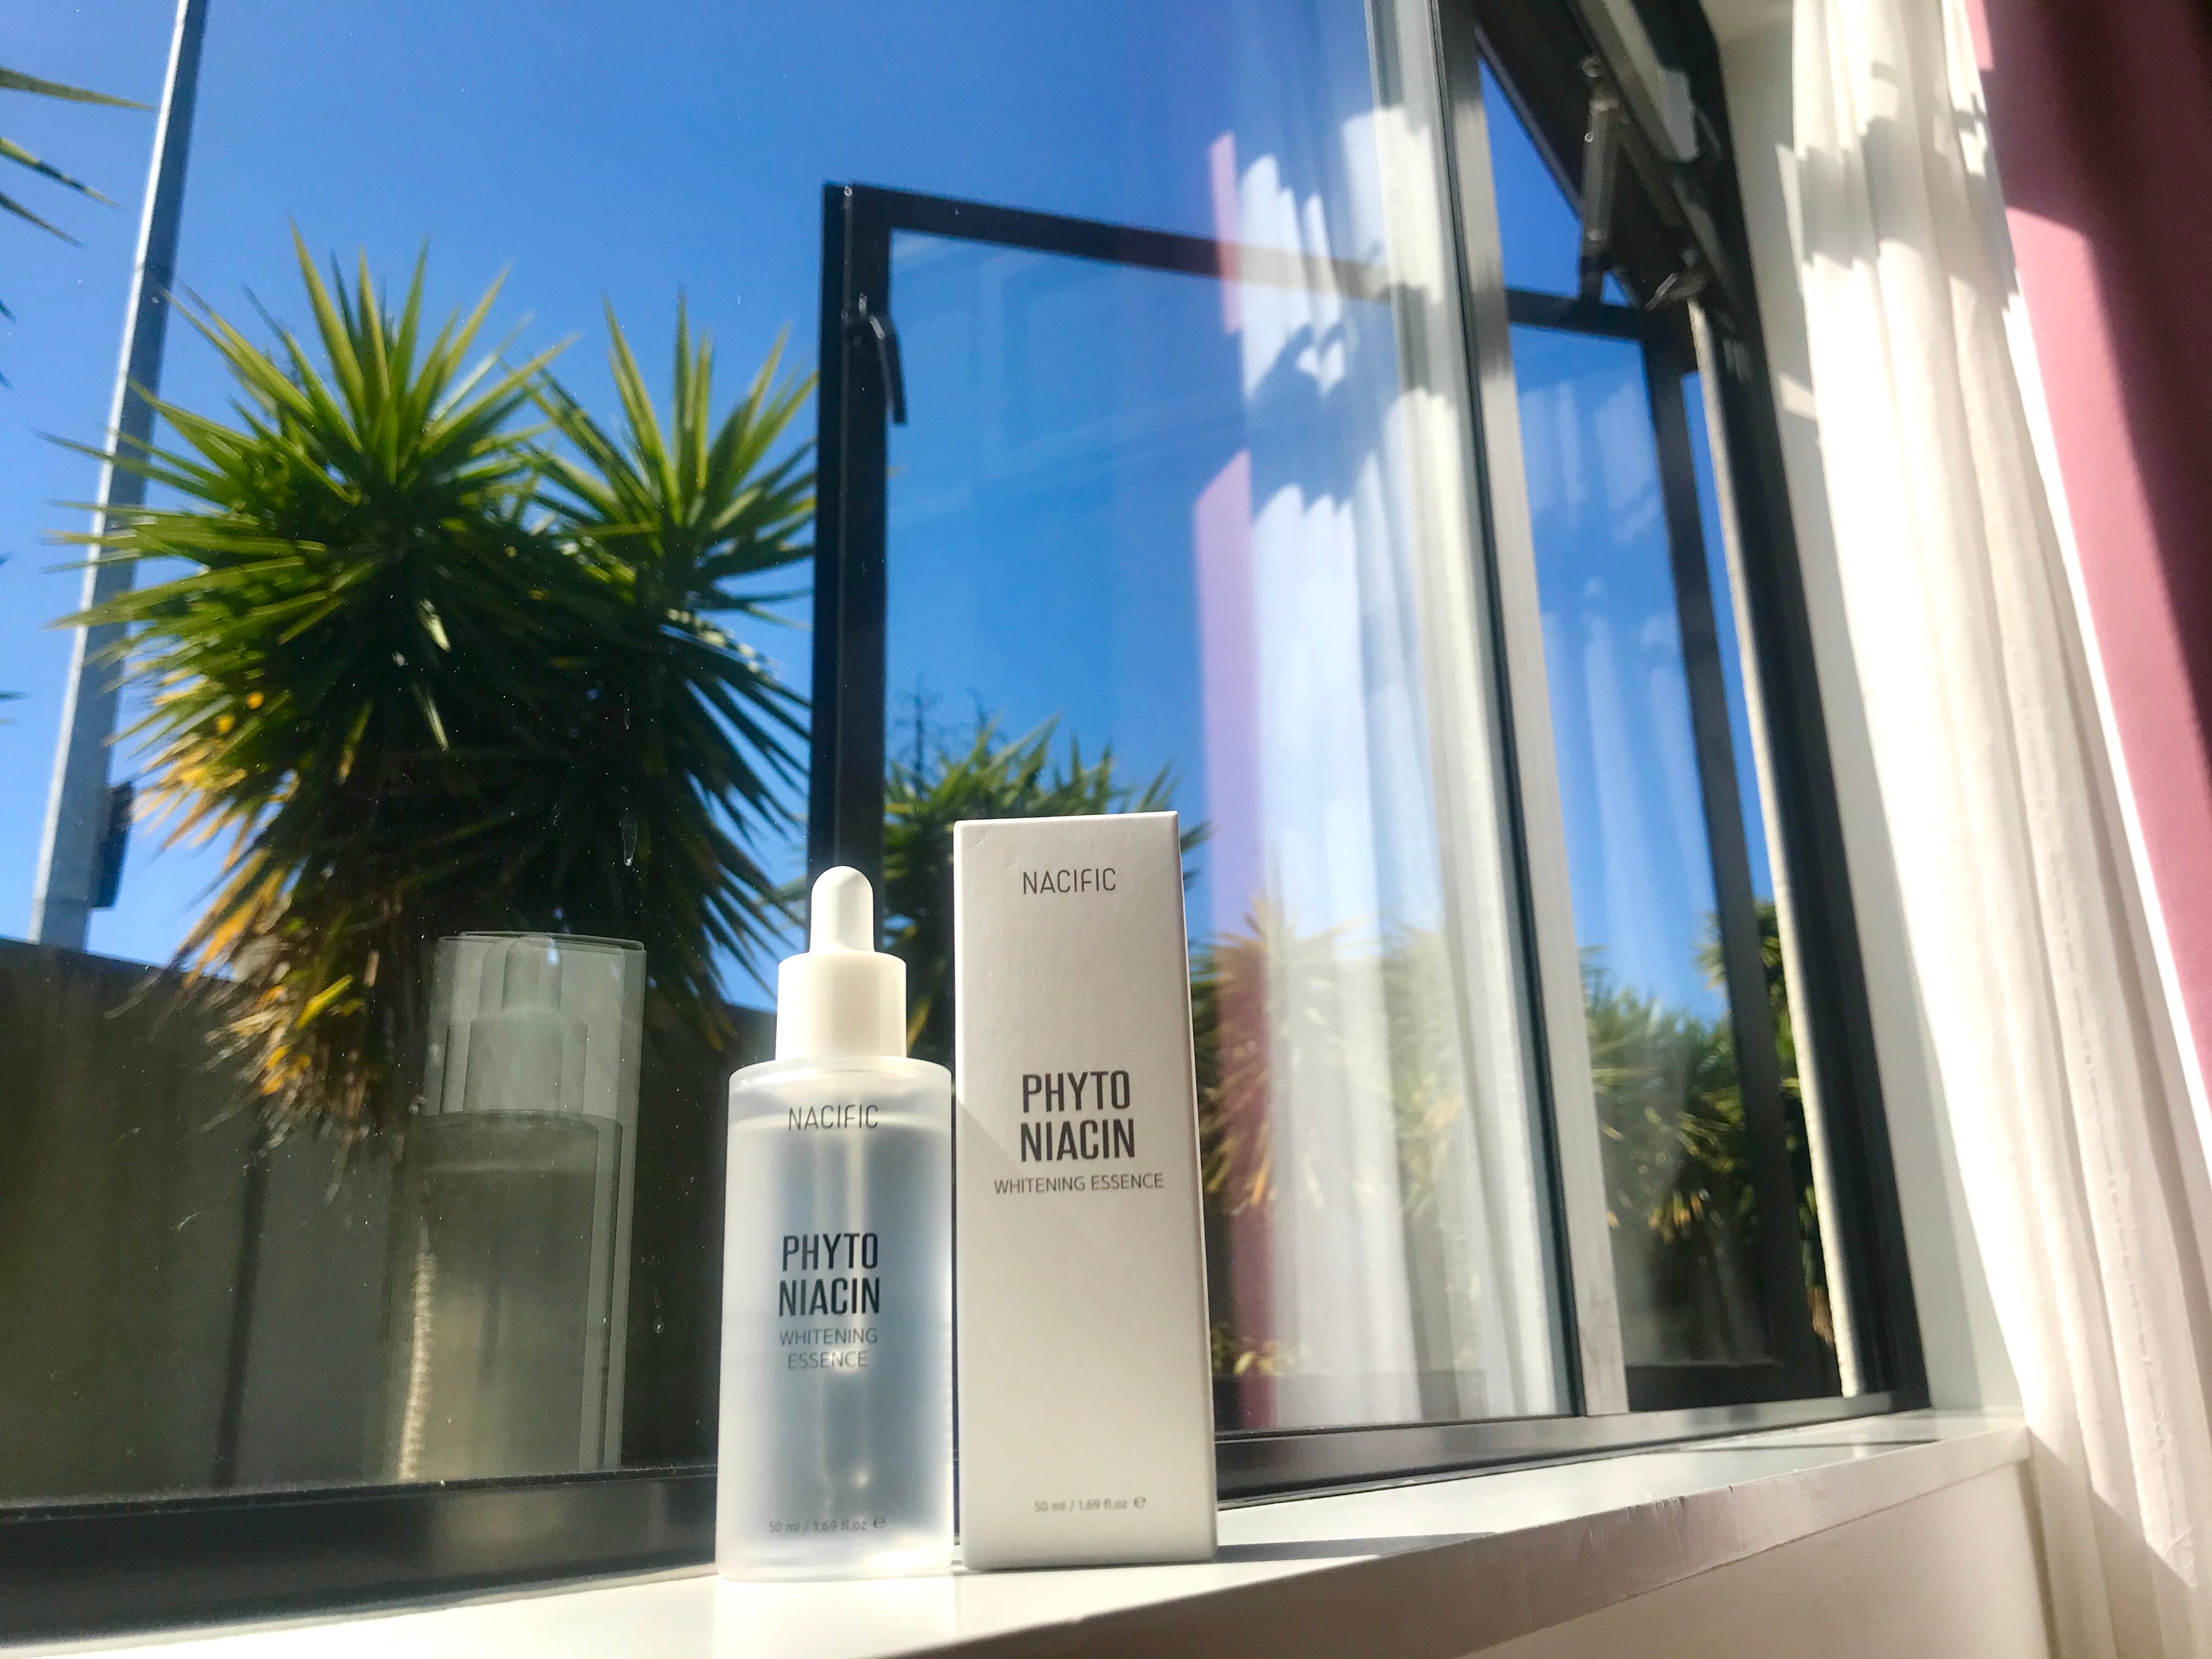 HI-REVIEW: NACIFIC Phyto Niacin Whitening Essence Review 💡